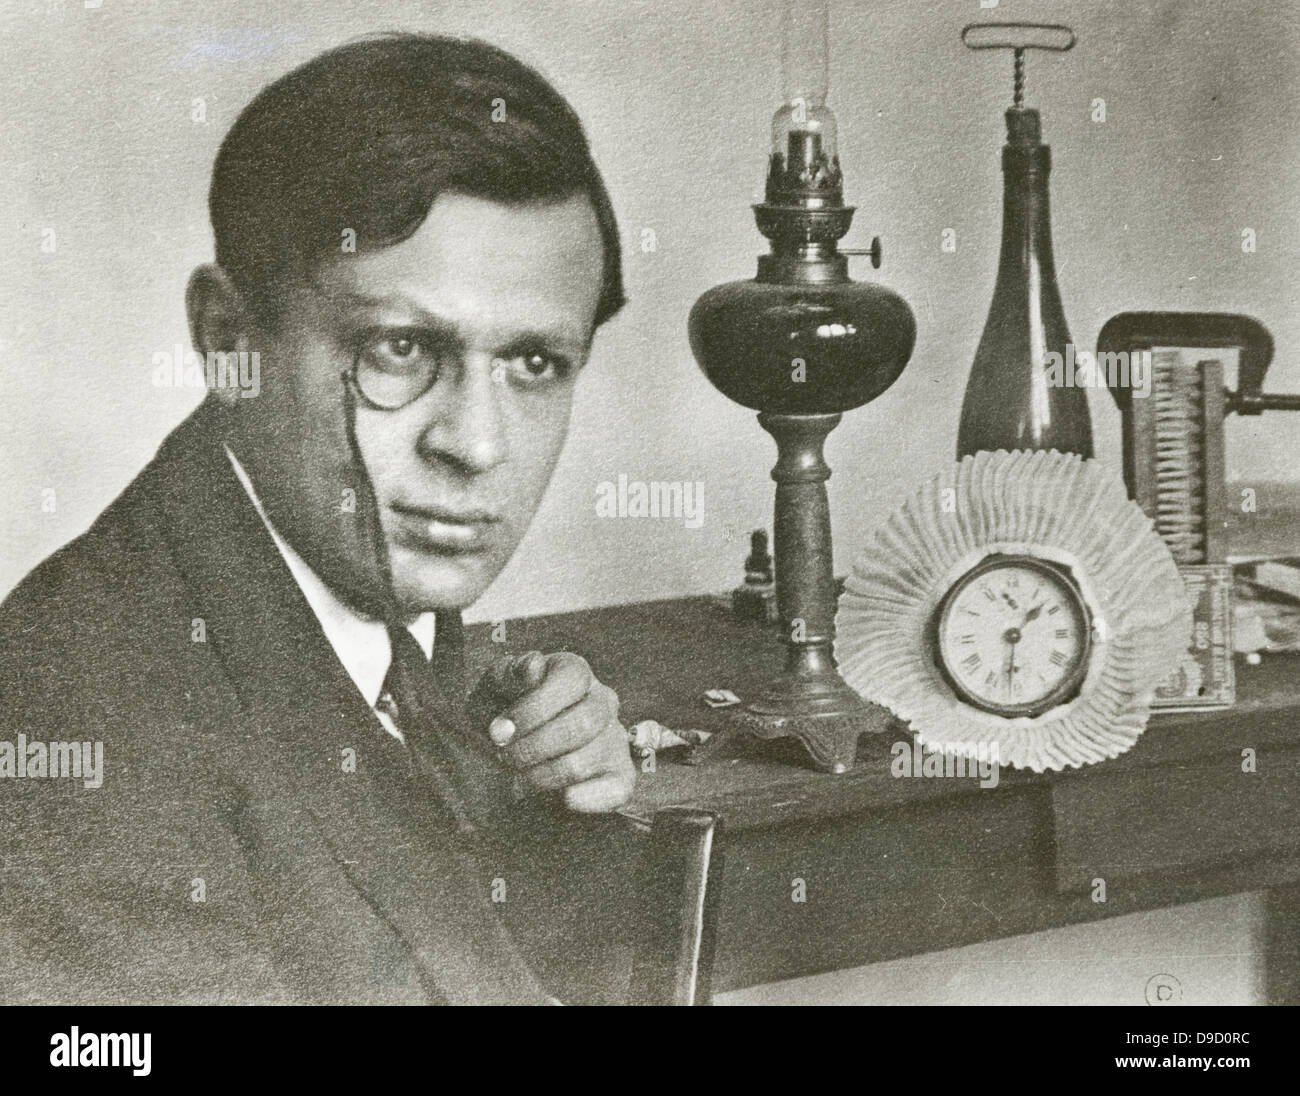 Tristan Tzara (1896-1963) born Samuel or Samy Rosenstock, also called S.Samyro, Romanian-French poet, essayist, journalist and performance artist. One of the founders of the Dada movement. Stock Photo